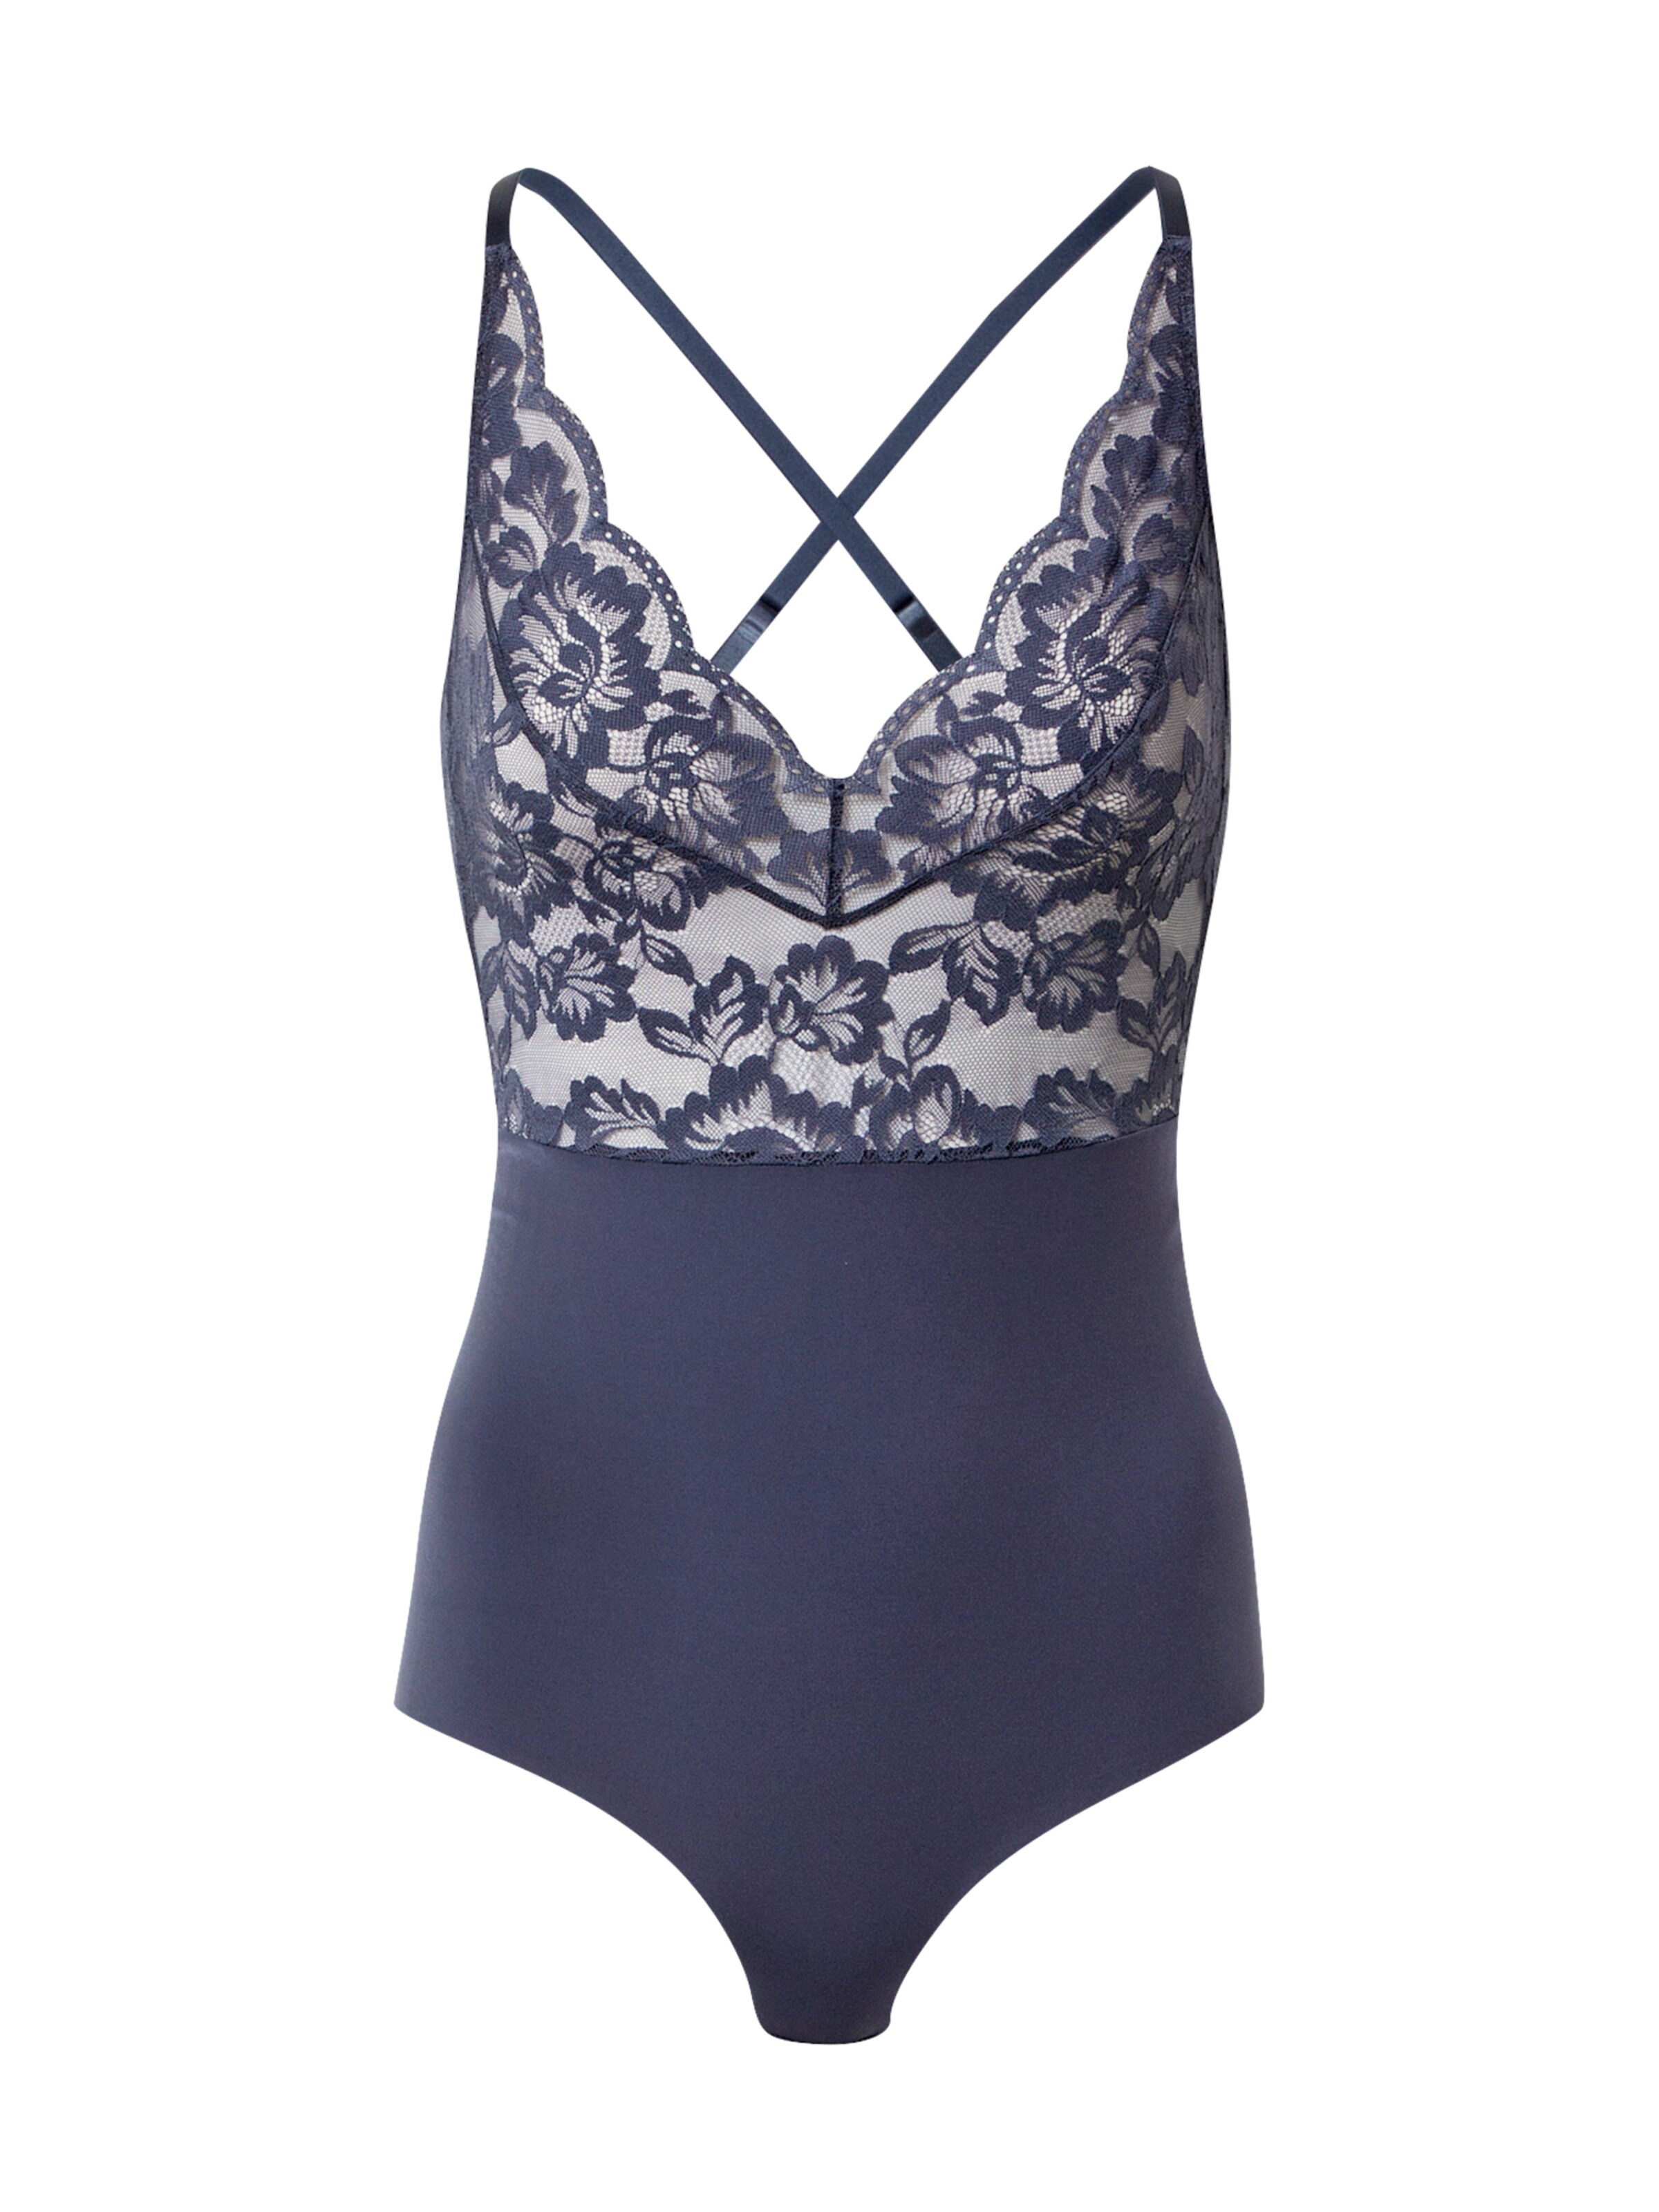 Intimo Donna Mey Body AMAZING in Blu Notte 